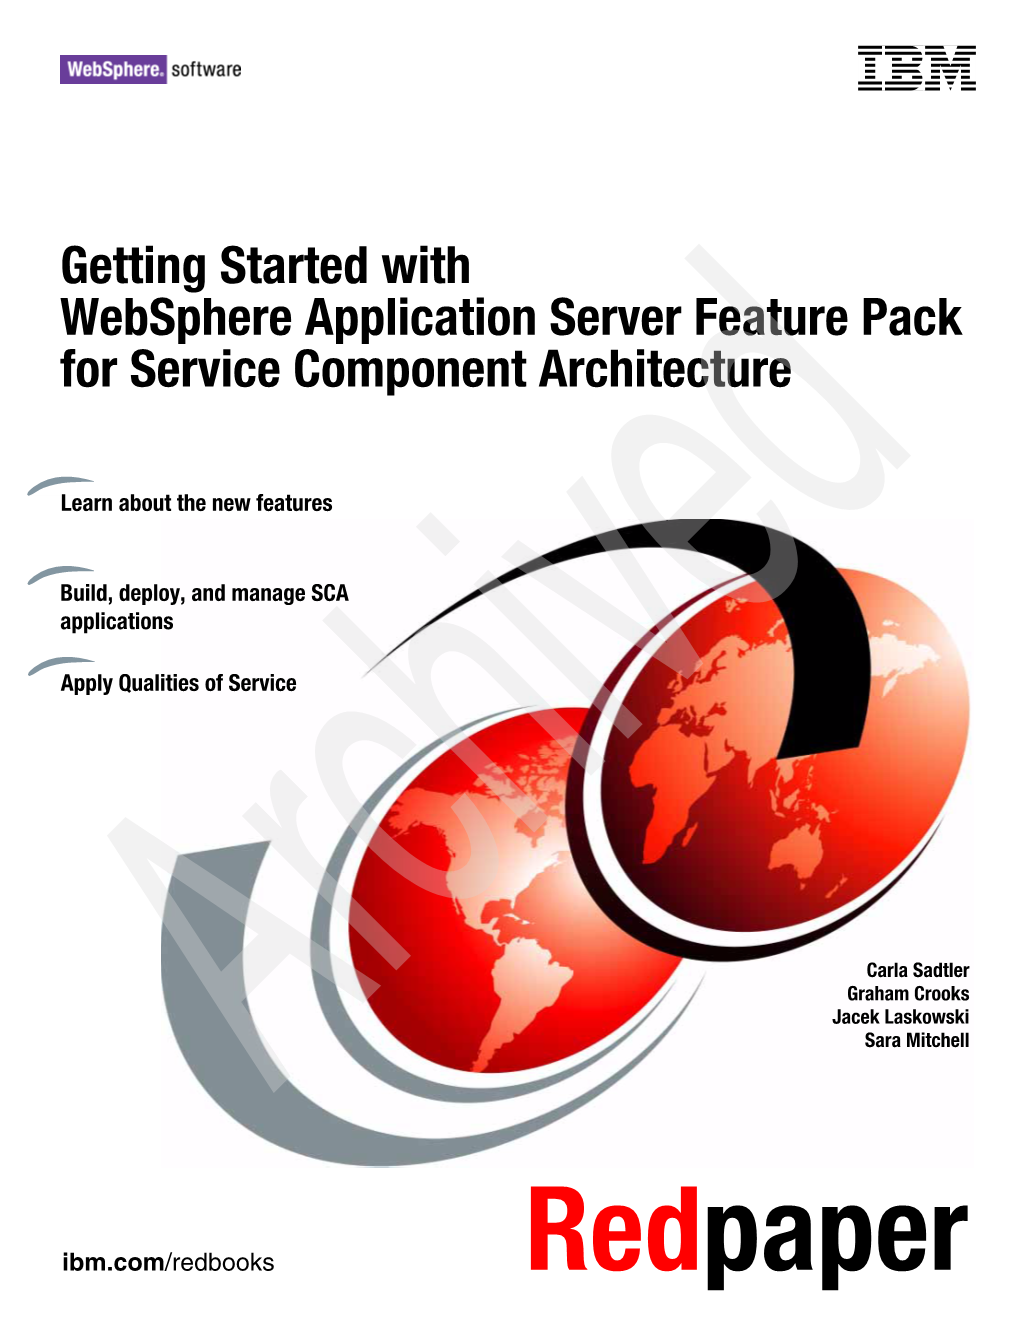 Getting Started with Websphere Application Server Feature Pack for Service Component Architecture